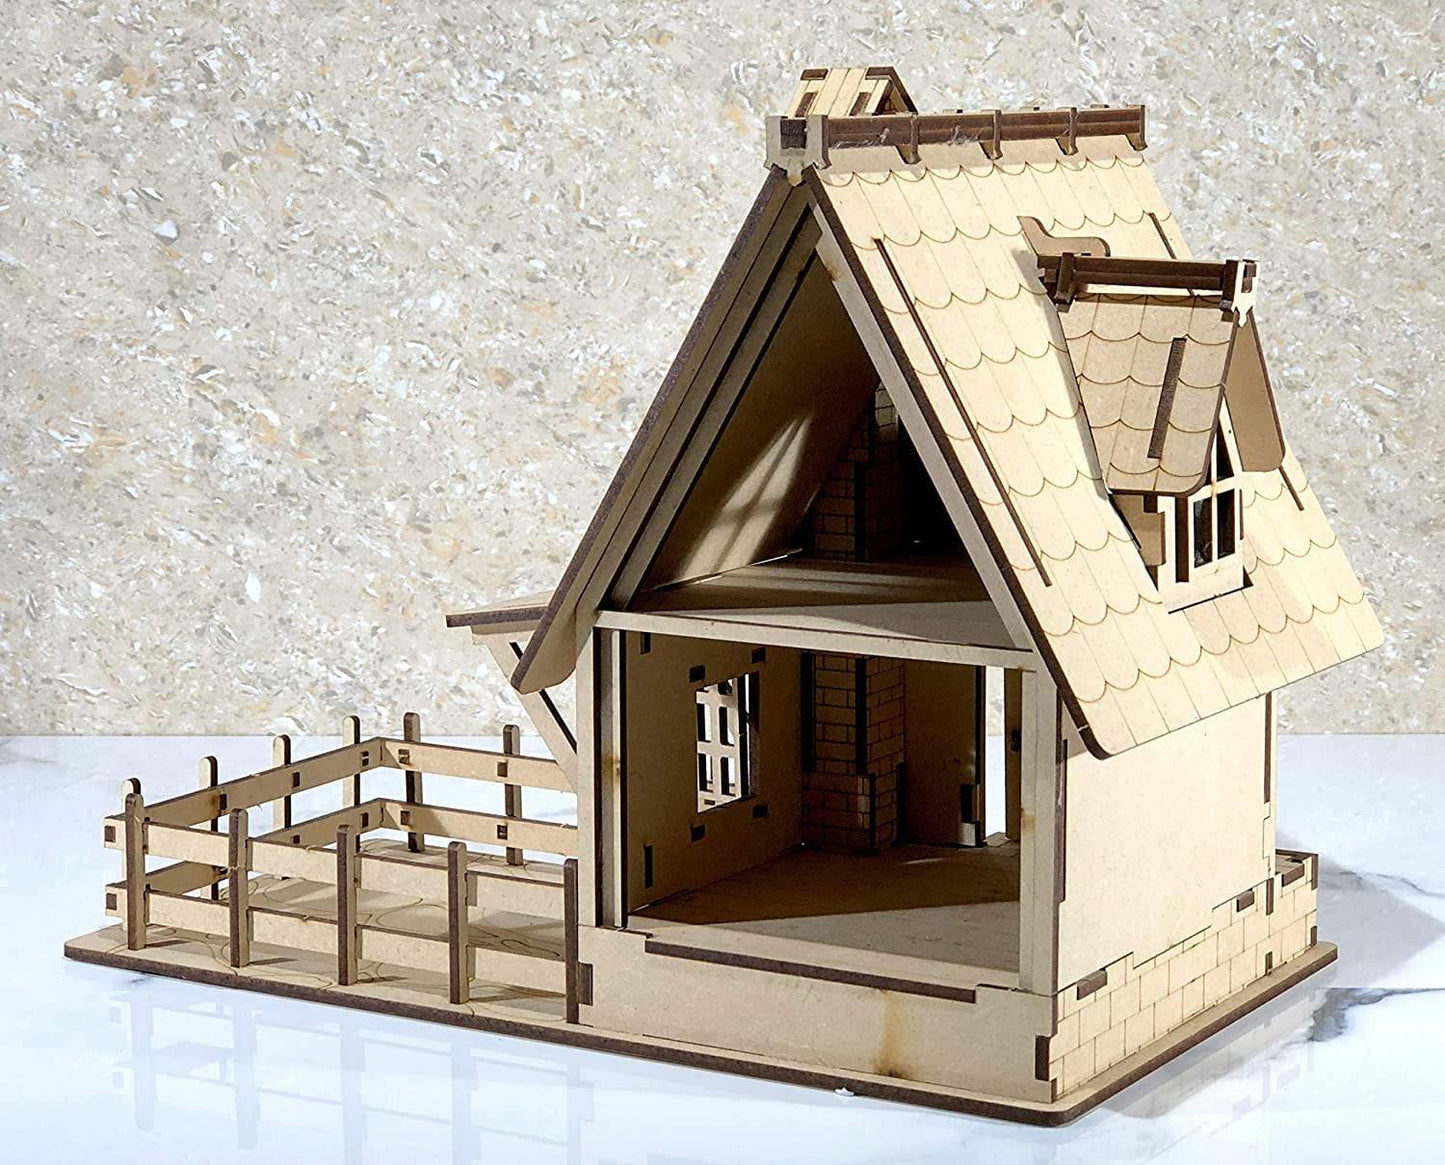 DIY Wooden Doll House Kit - DIY Garden House Miniature - Farm House - 3D Wooden Puzzle - Construction Toy, Modeling Kit - Easy to Assemble